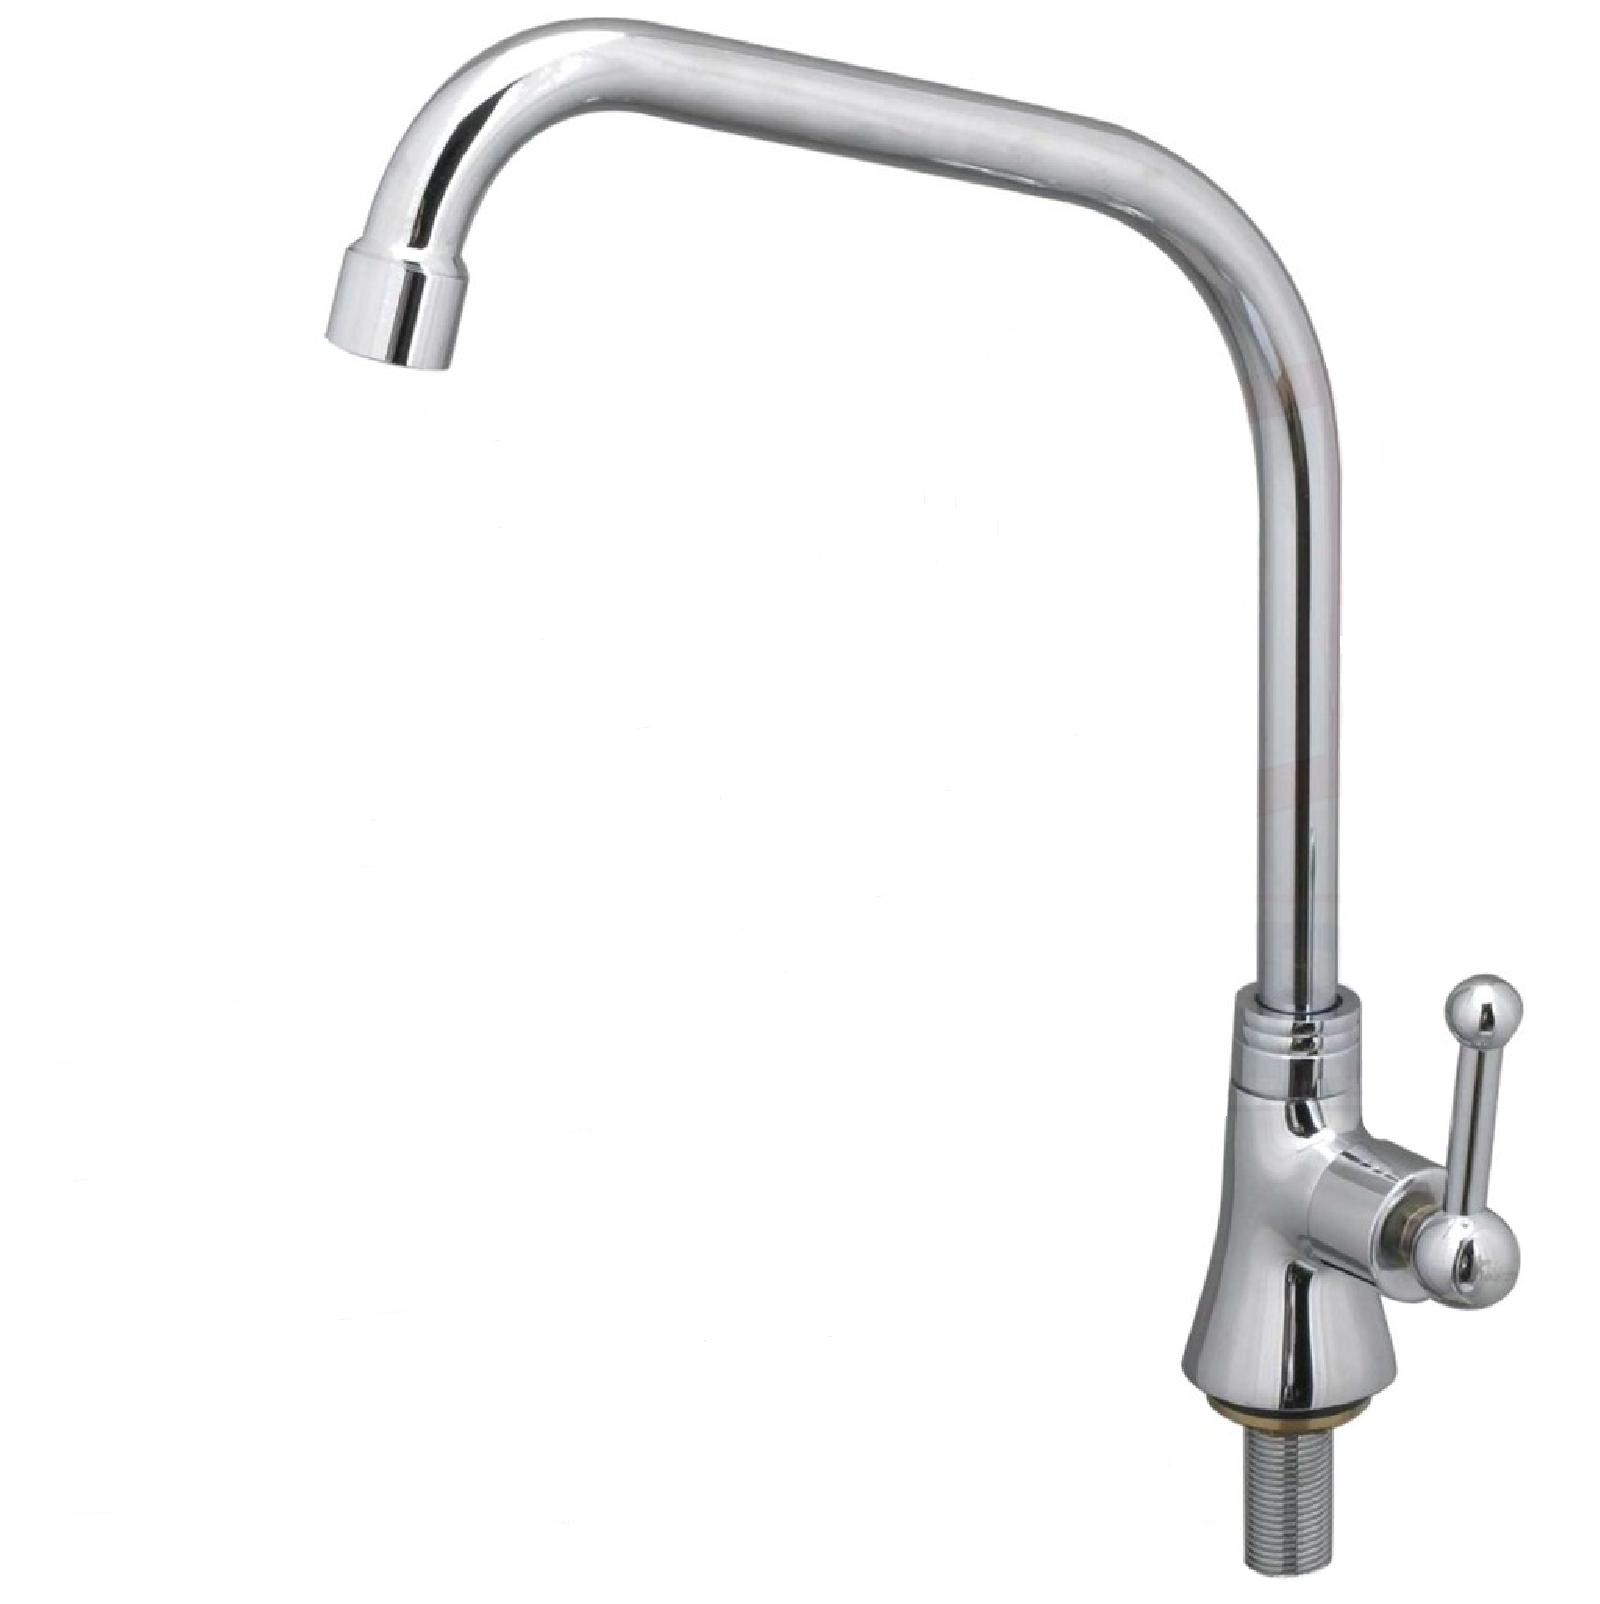 RIZZO Lever-Handle Kitchen Faucet RL320